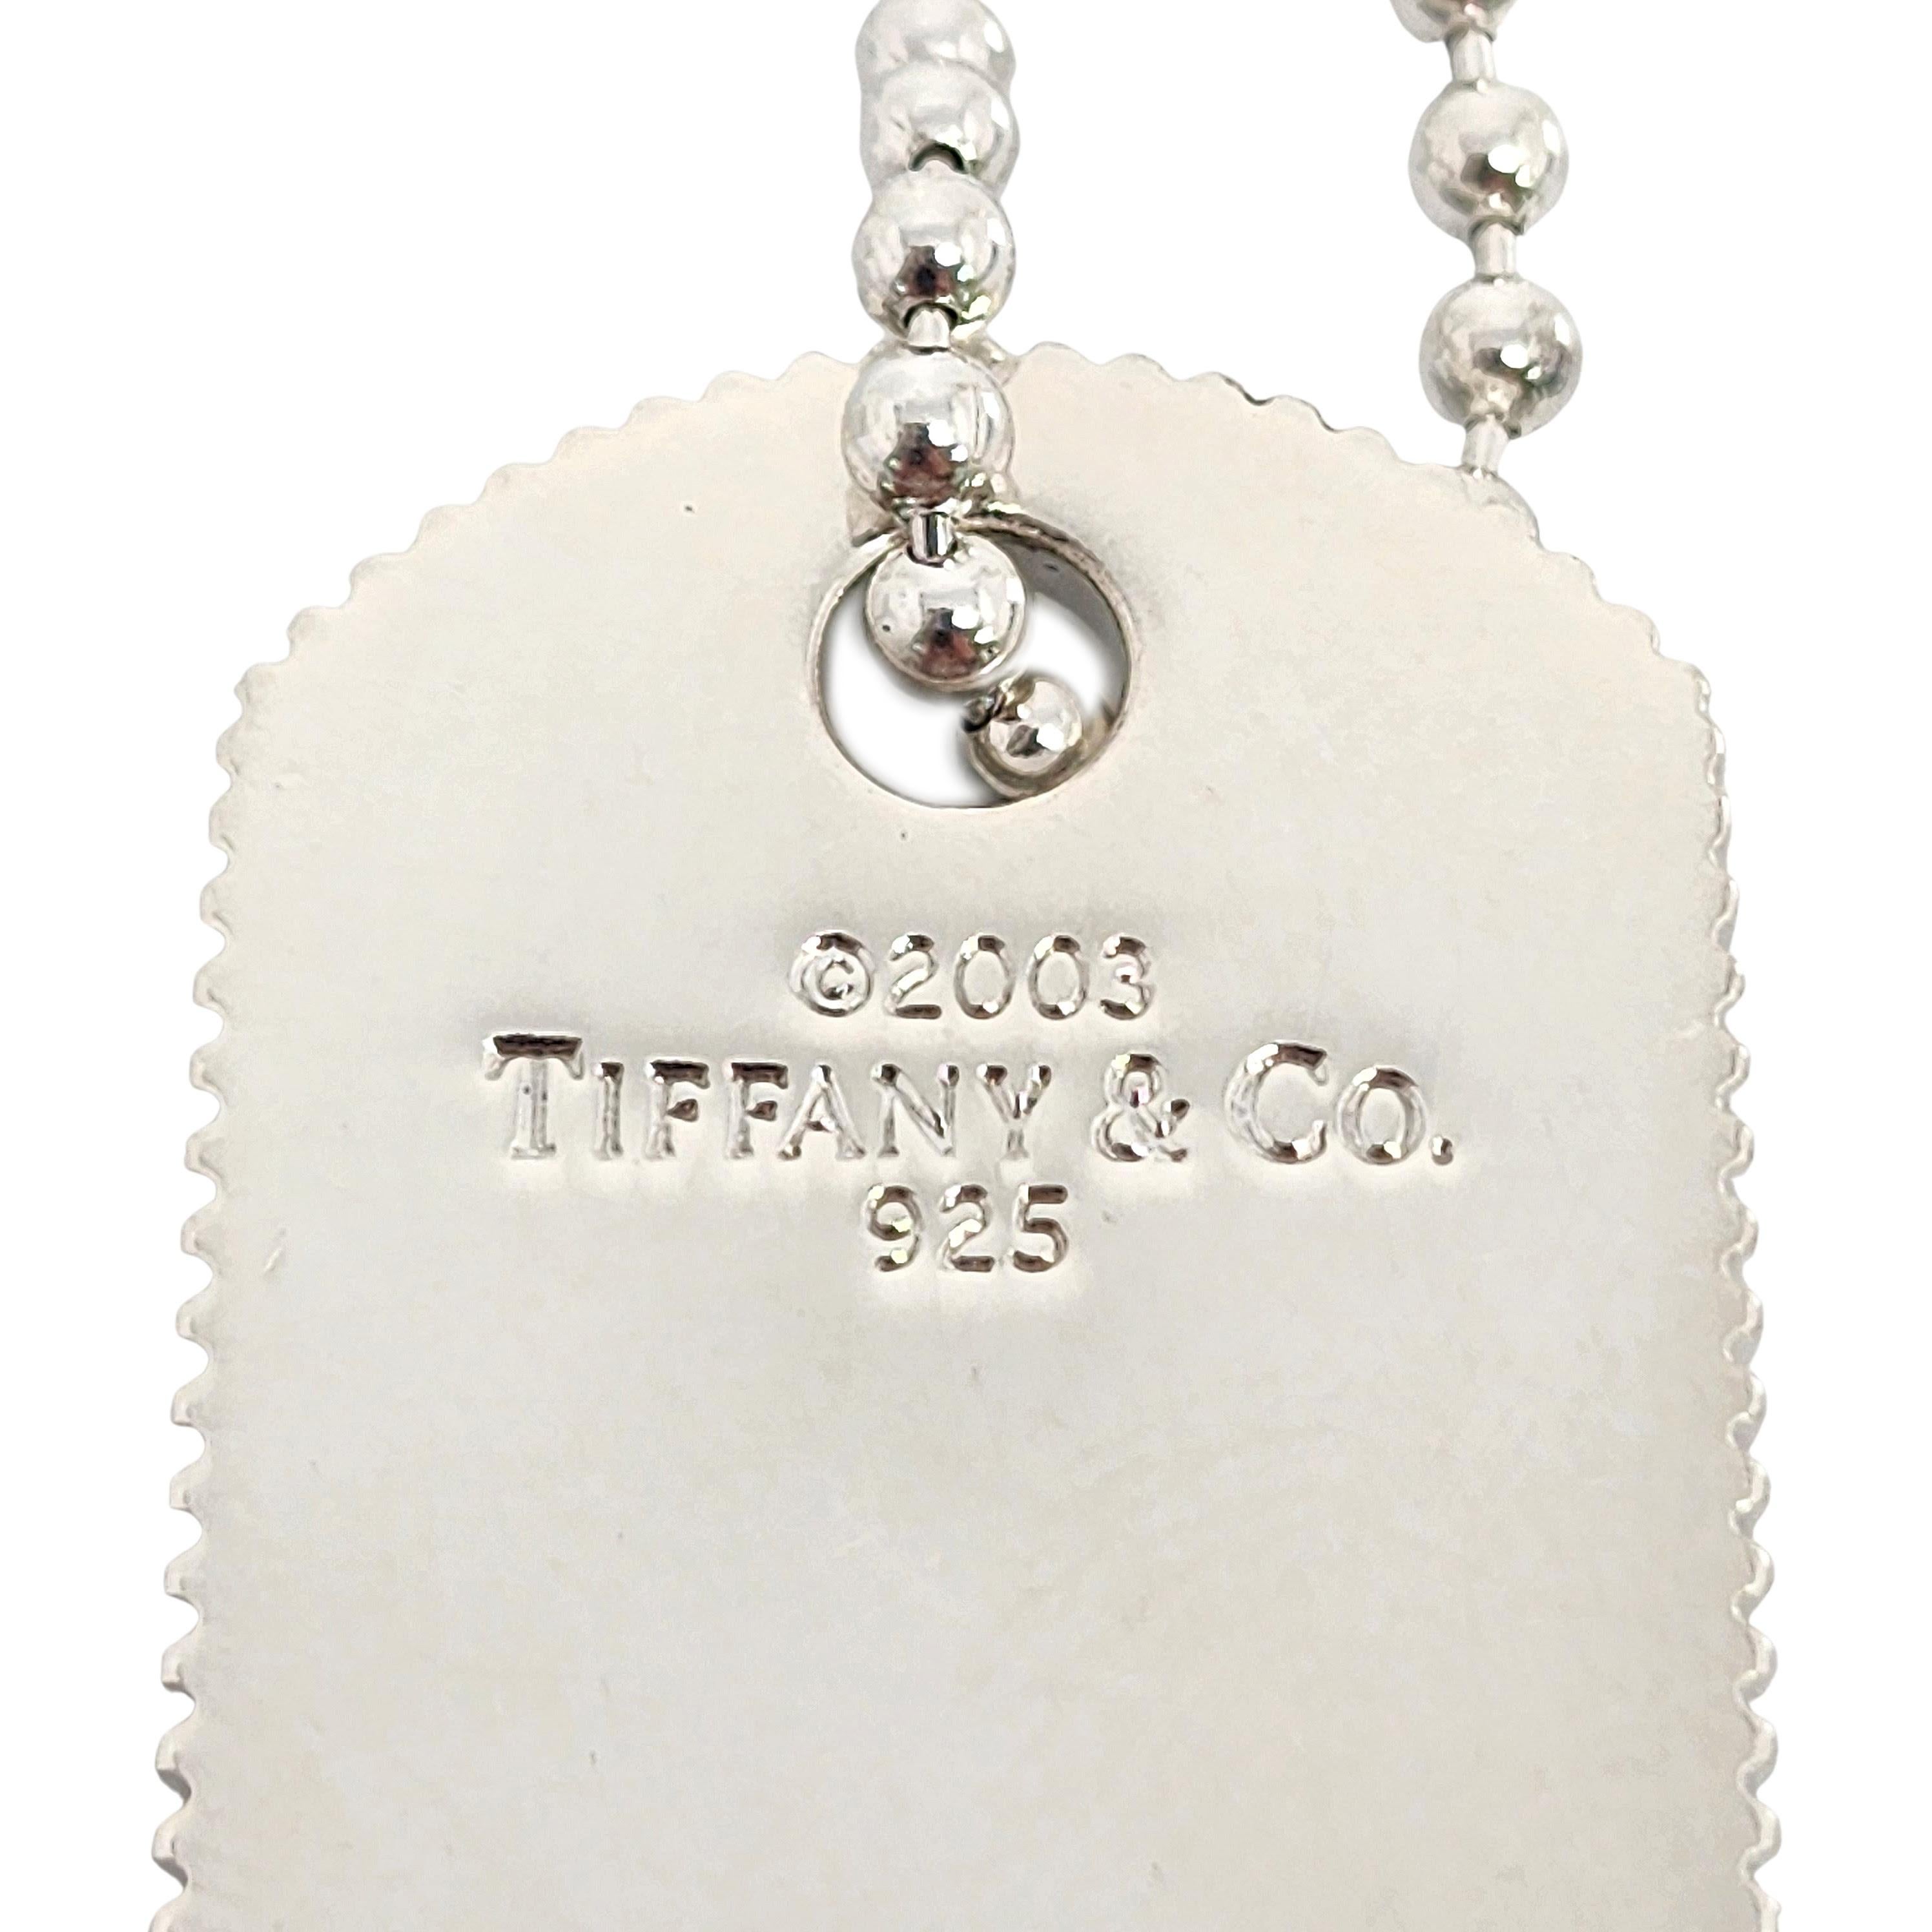 Tiffany & Co Sterling Silver 2003 Dog Chain Bead Ball Chain Necklace 5